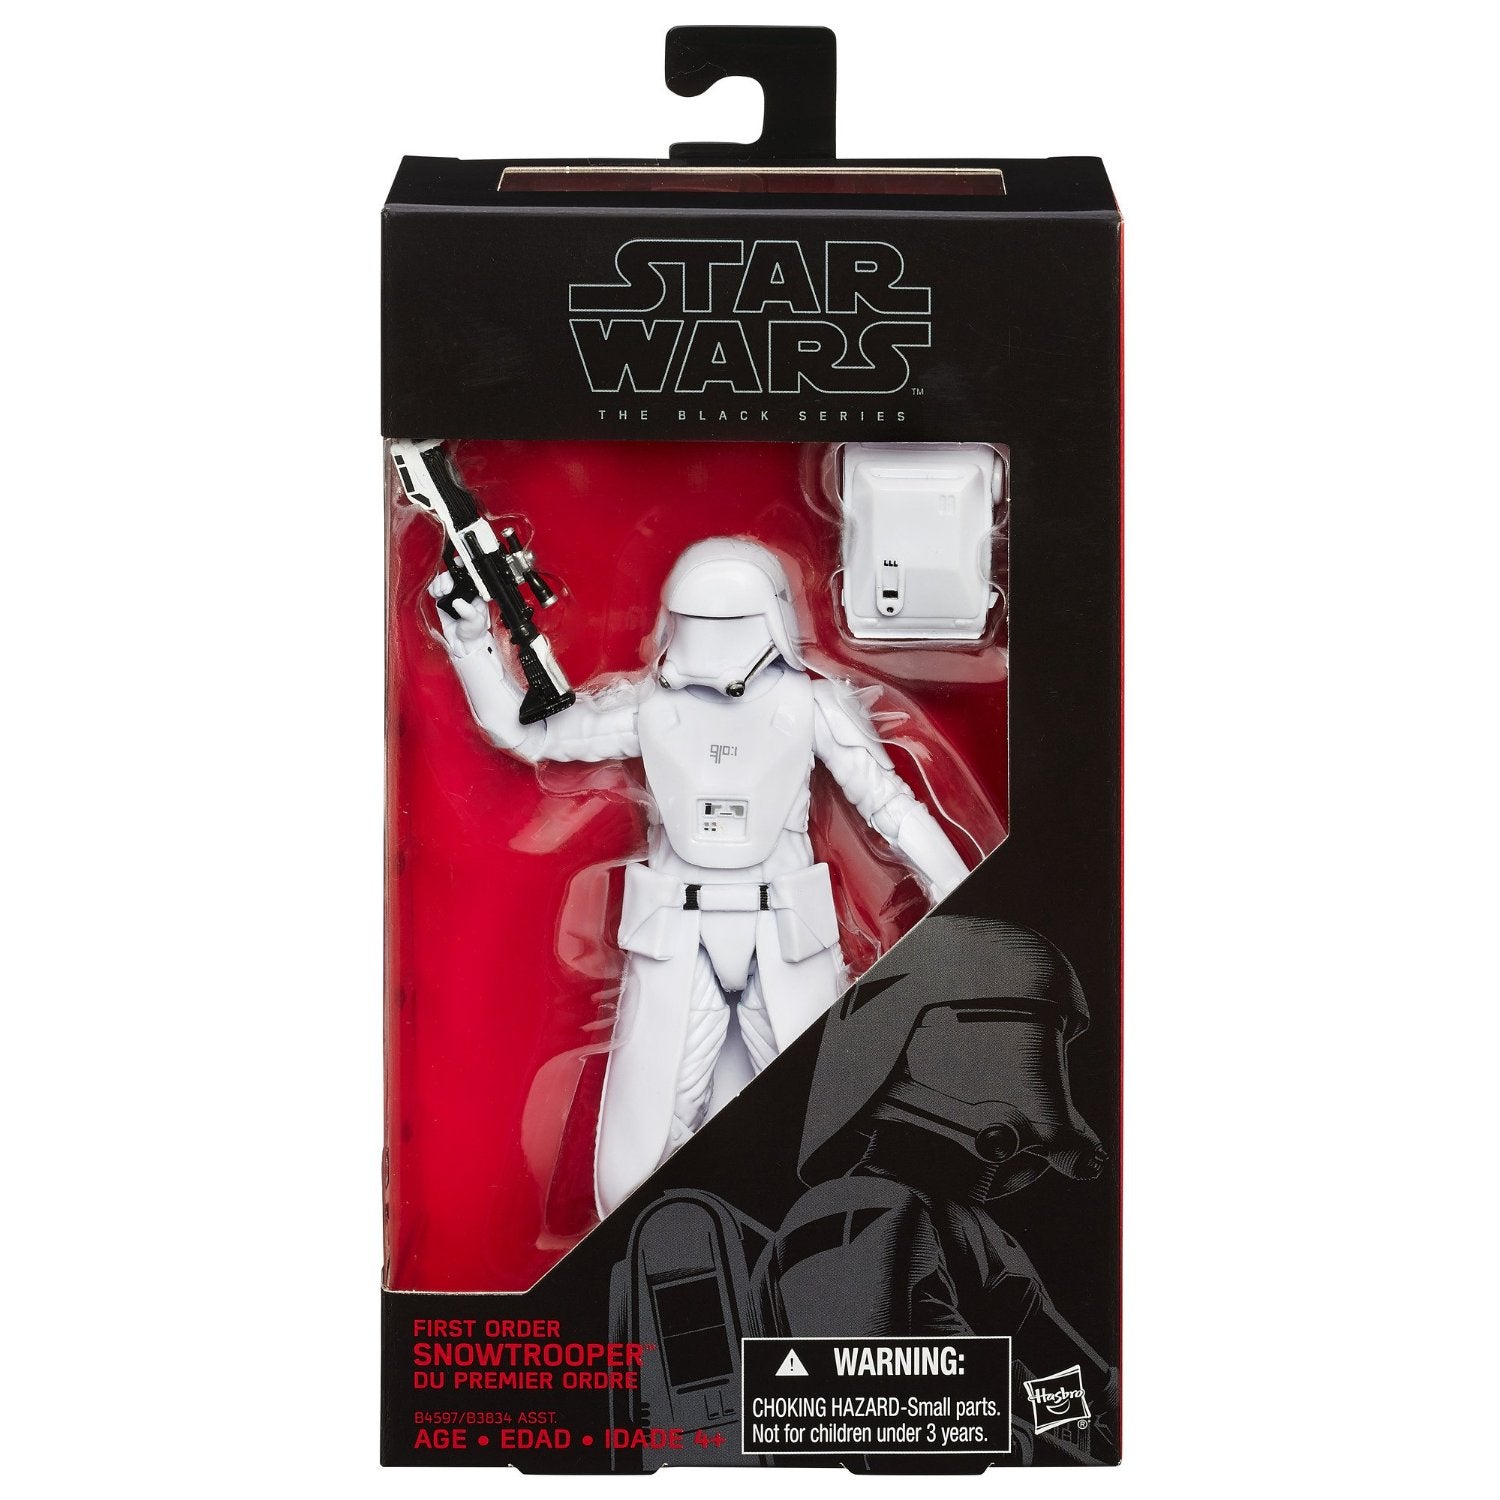 Hasbro Star Wars Black Series Force Awakens #12 First Order Snowtrooper 6 Inch Action Figure